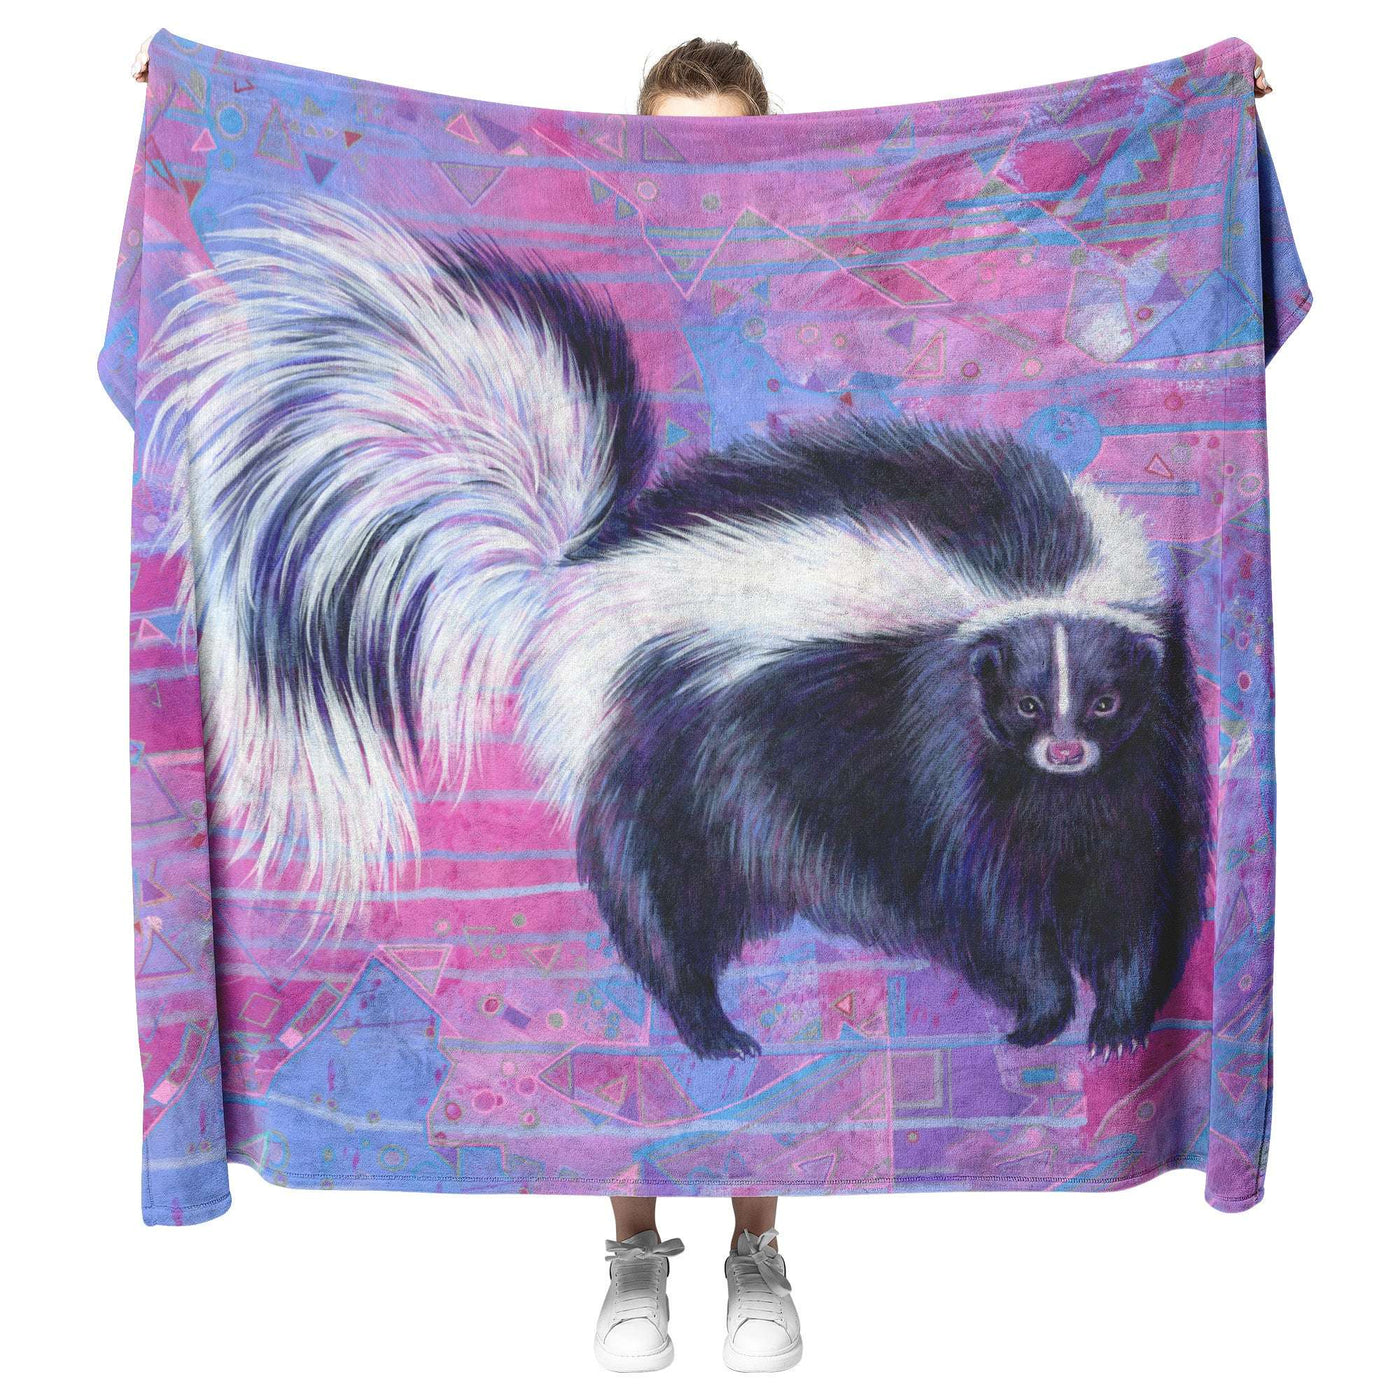 Person holding up a large Skunk Blanket featuring a colorful geometric pattern and a detailed illustration of a skunk.